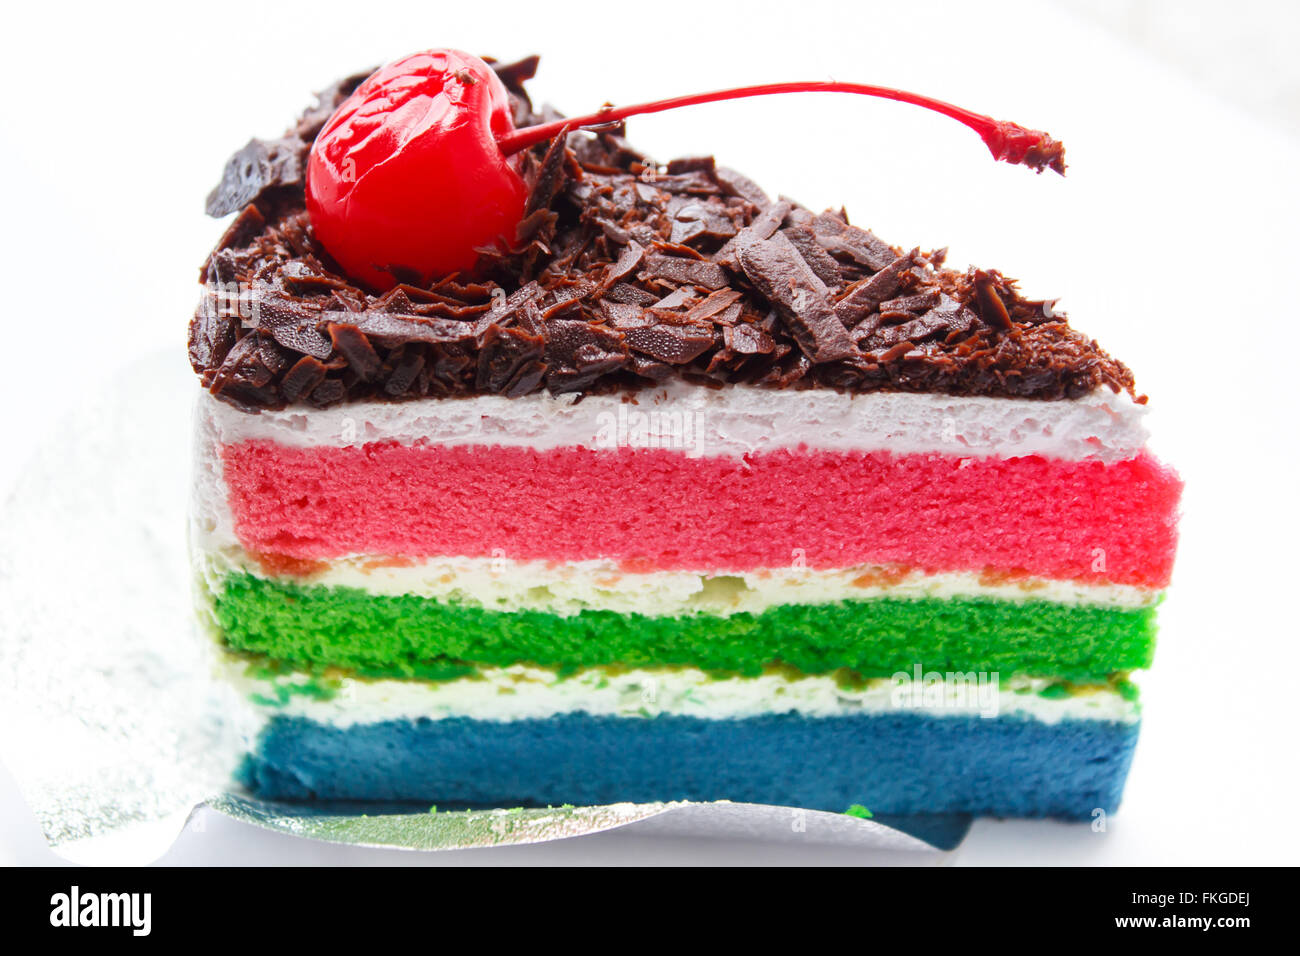 Delicious homemade rainbow layer cake with cup of coffee Stock Photo  Alamy